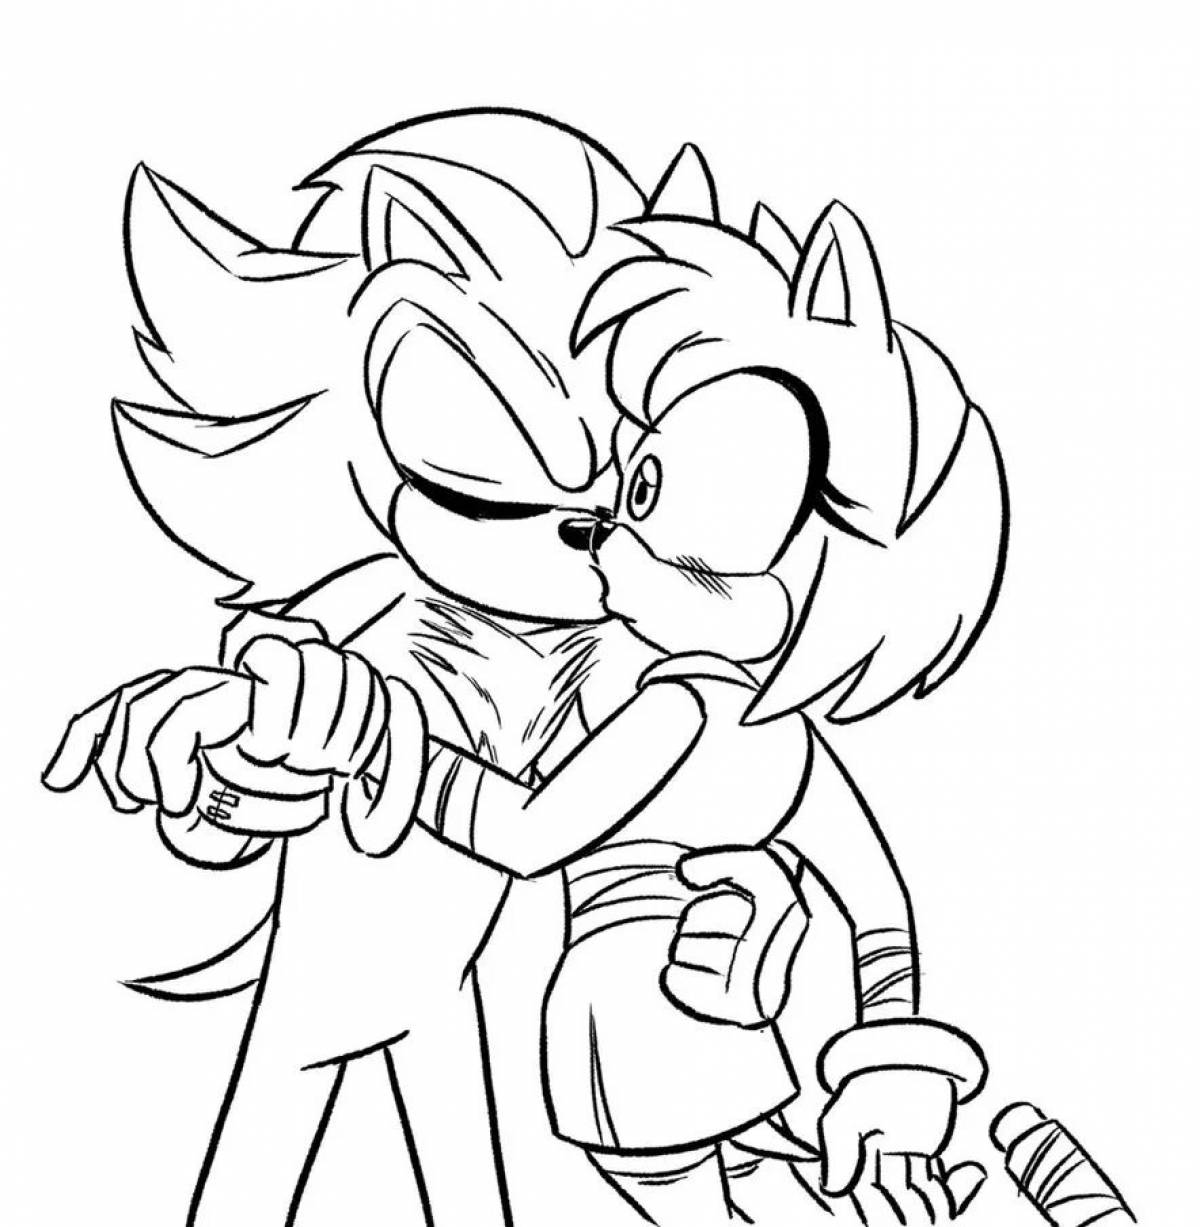 Comic coloring knuckles and rouge